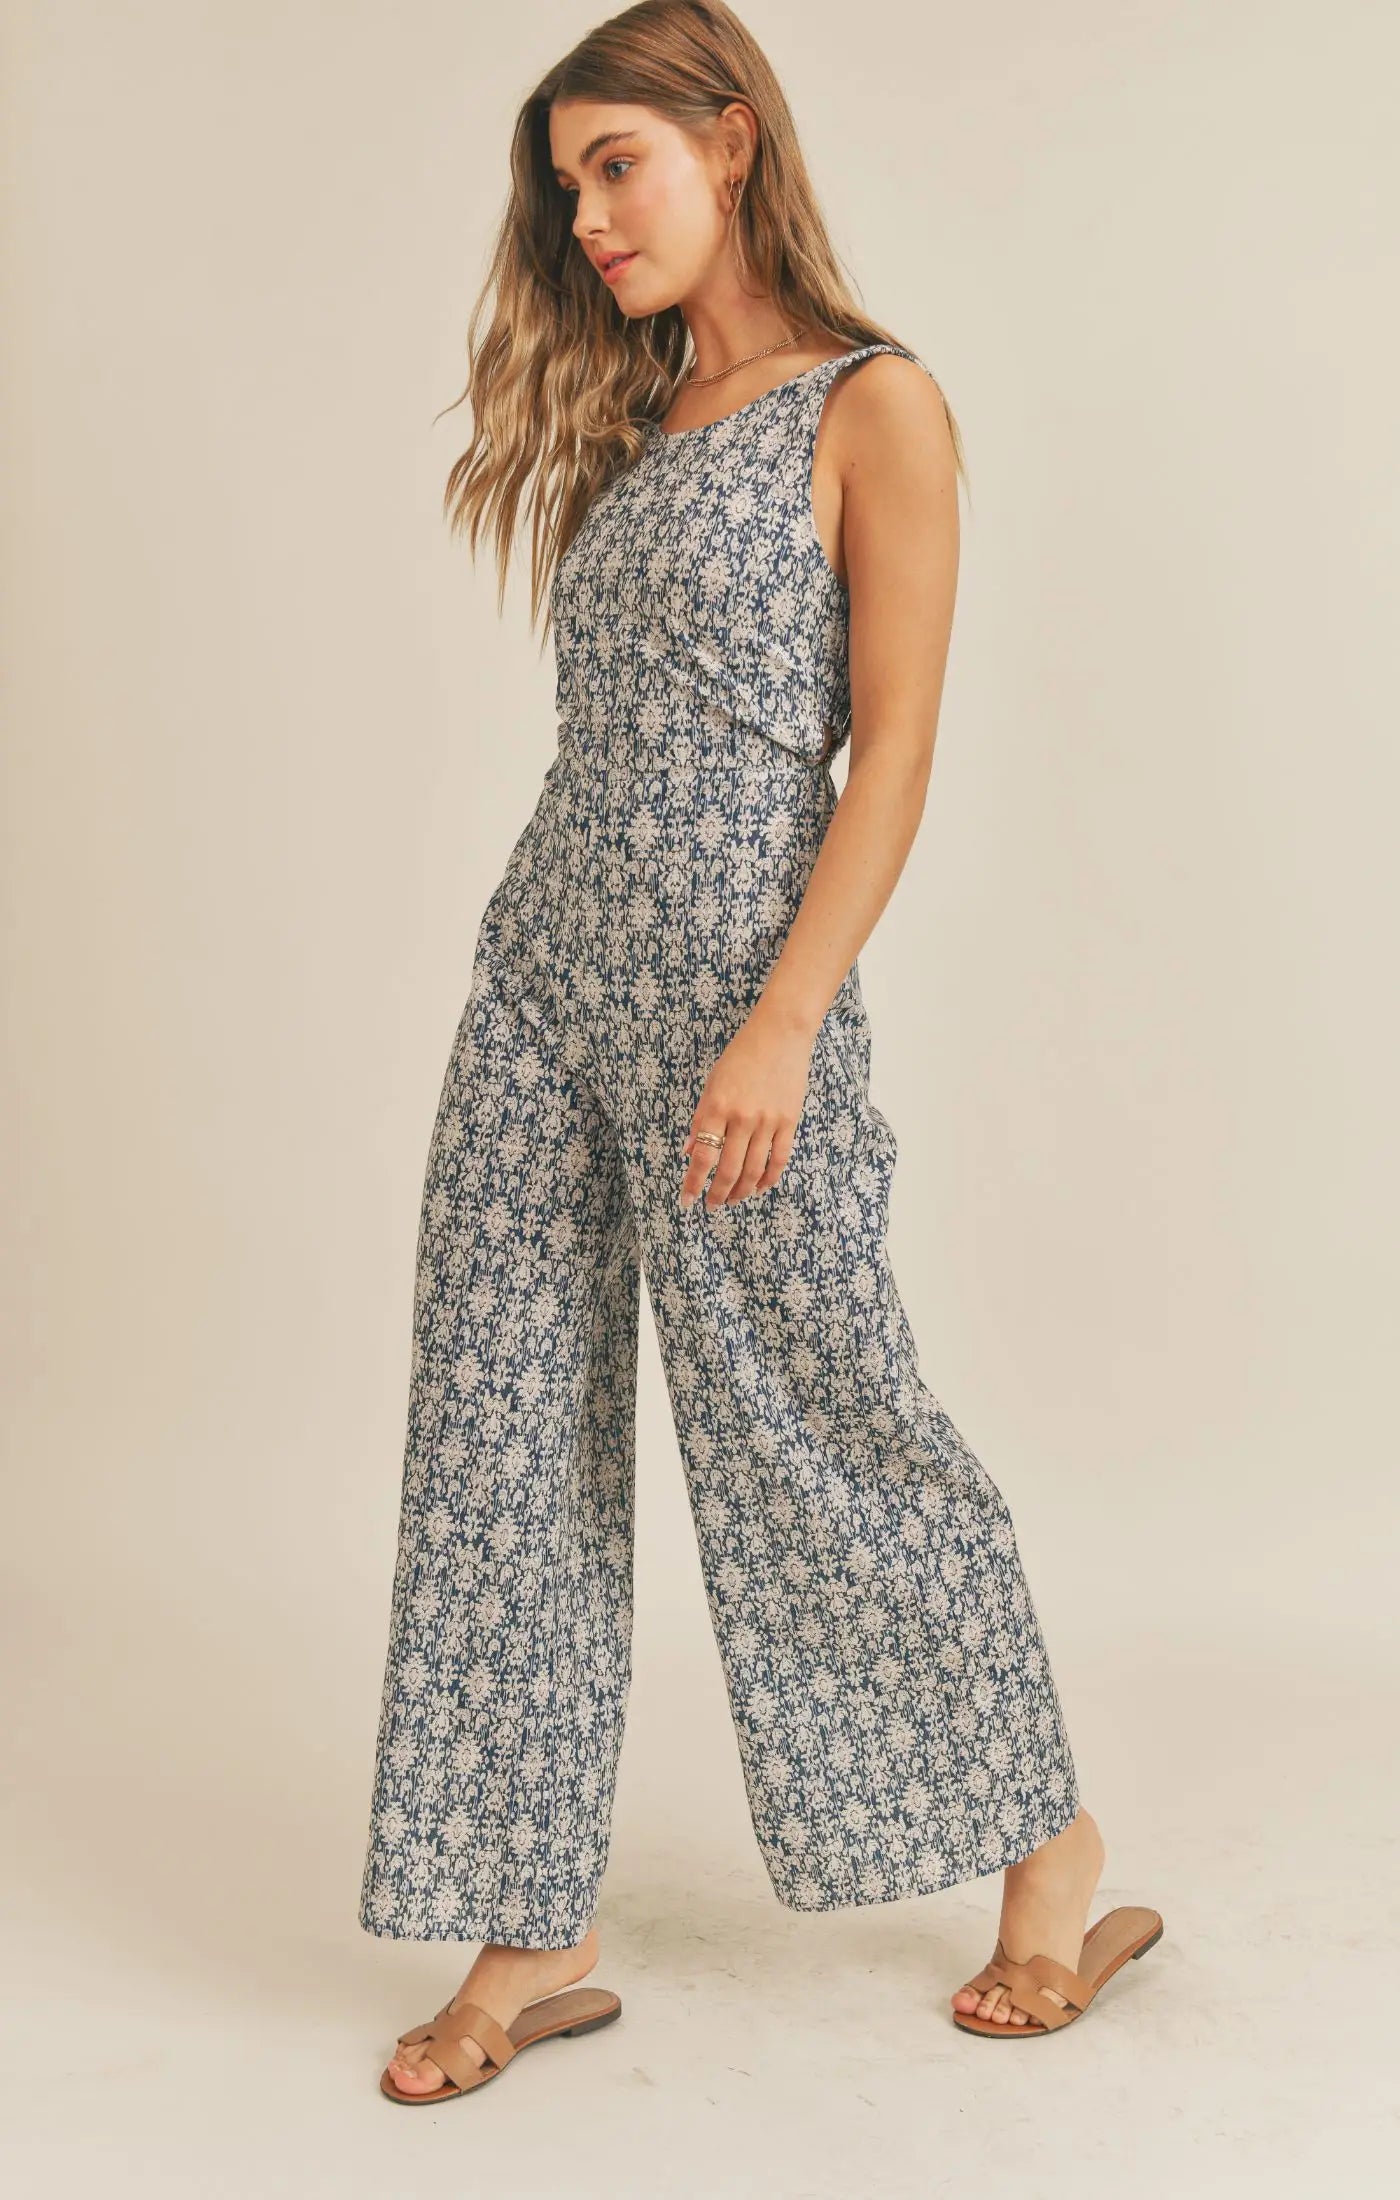 The Walk With Me Open Back Jumpsuit